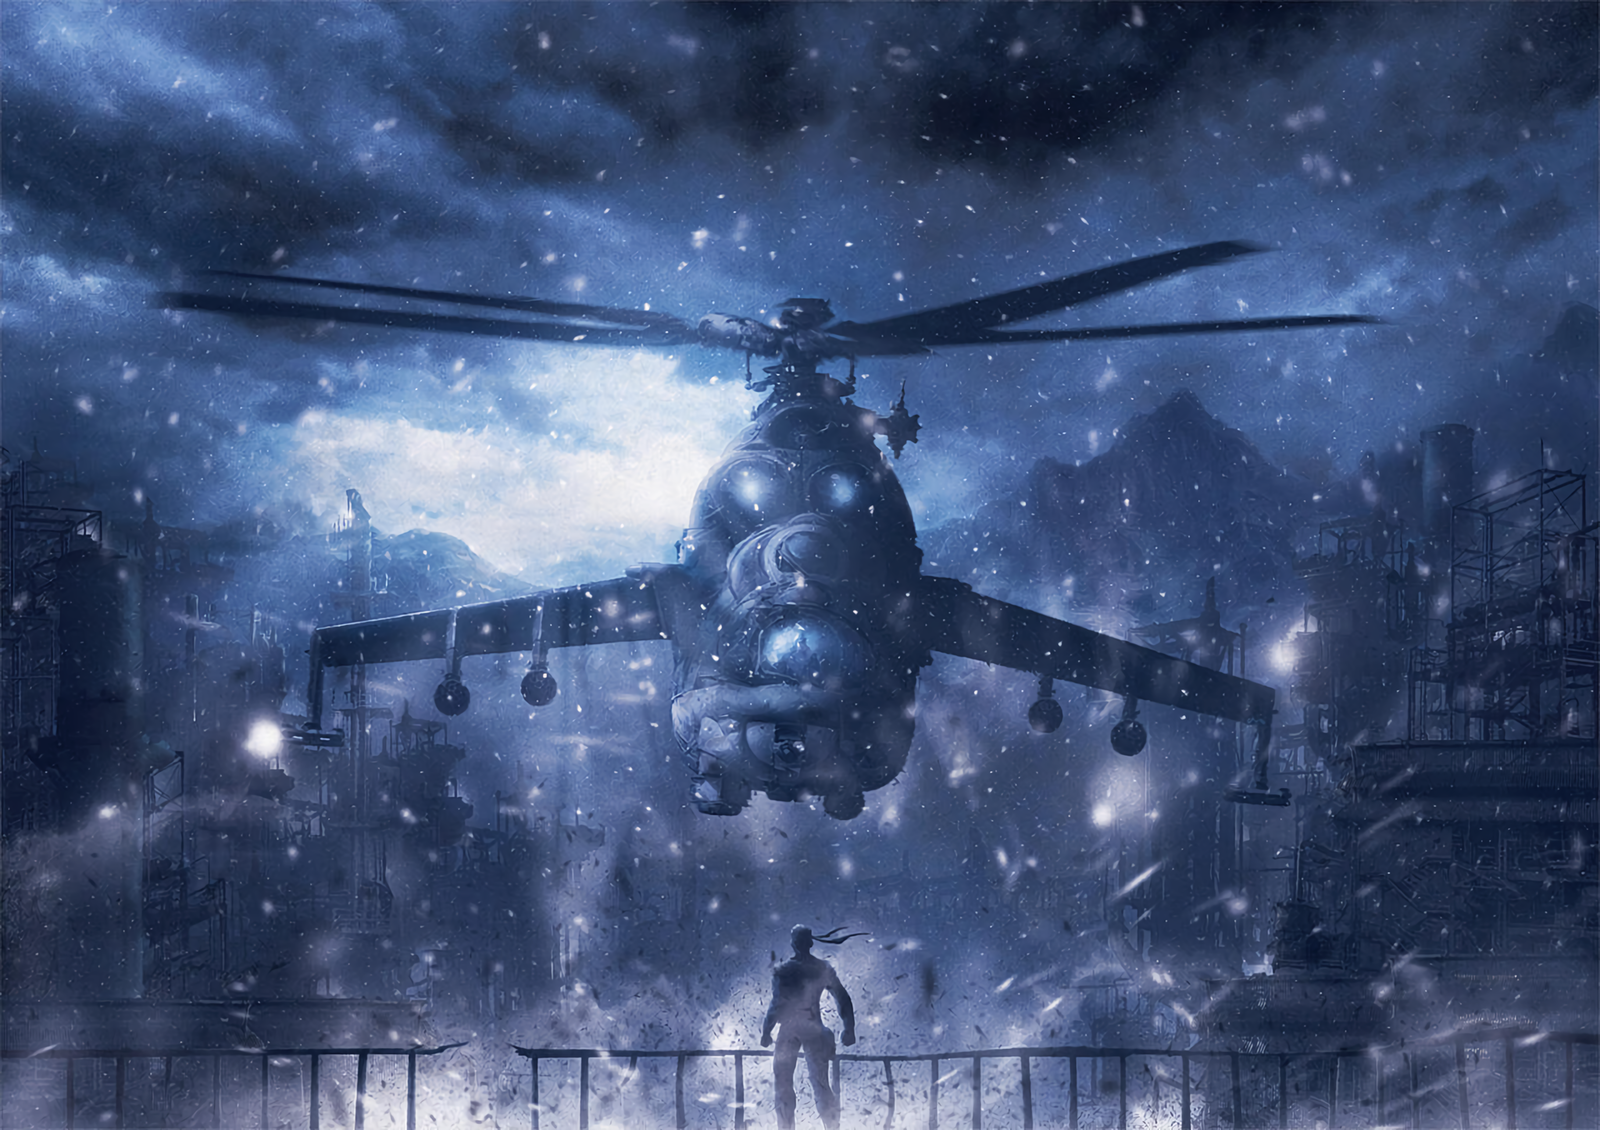 I'm Your Shadow - Metal gear solid, Games, Art, Solid snake, Liquid snake, Helicopter, Orioto